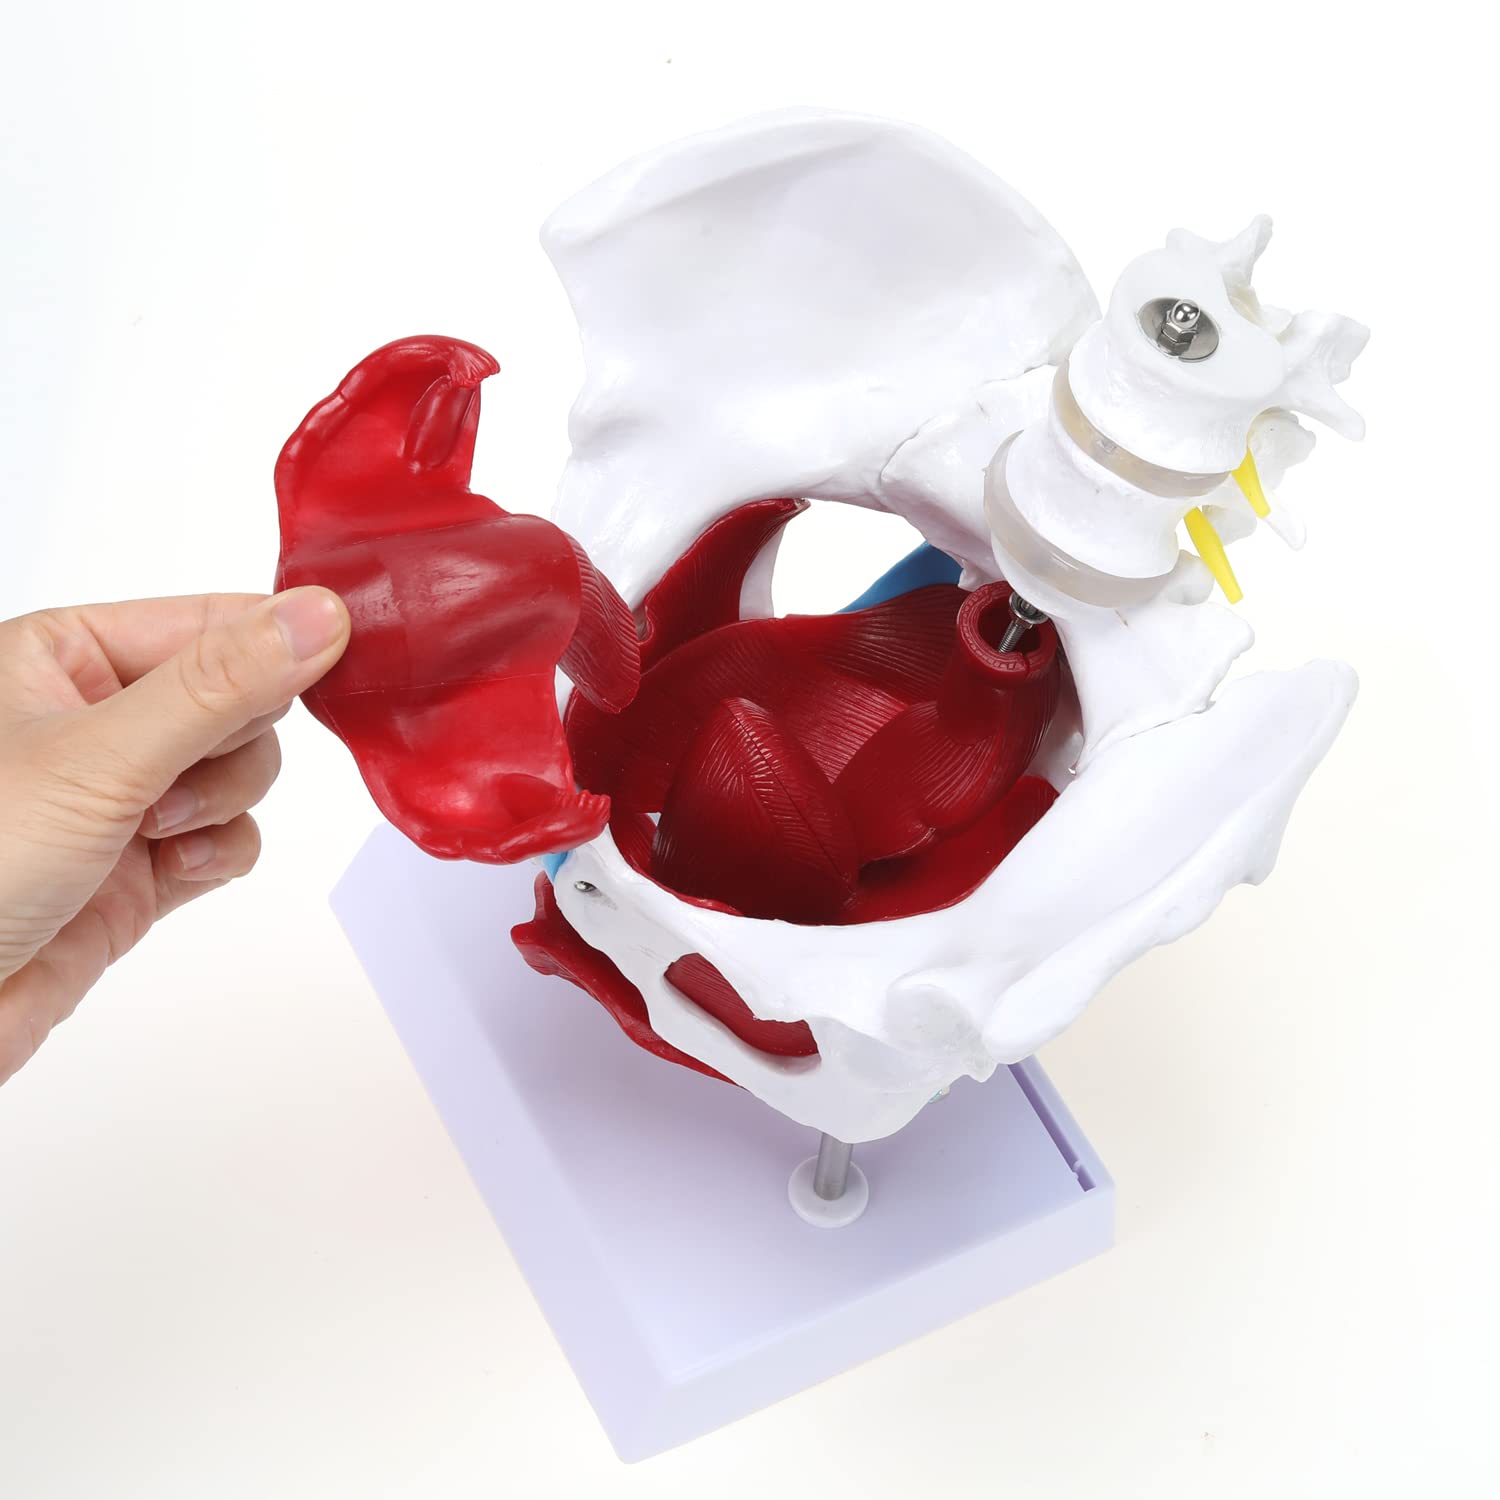  Pelvis Model with Organs Pelvic Floor Muscles and Reproductive Organs and Removable Organs